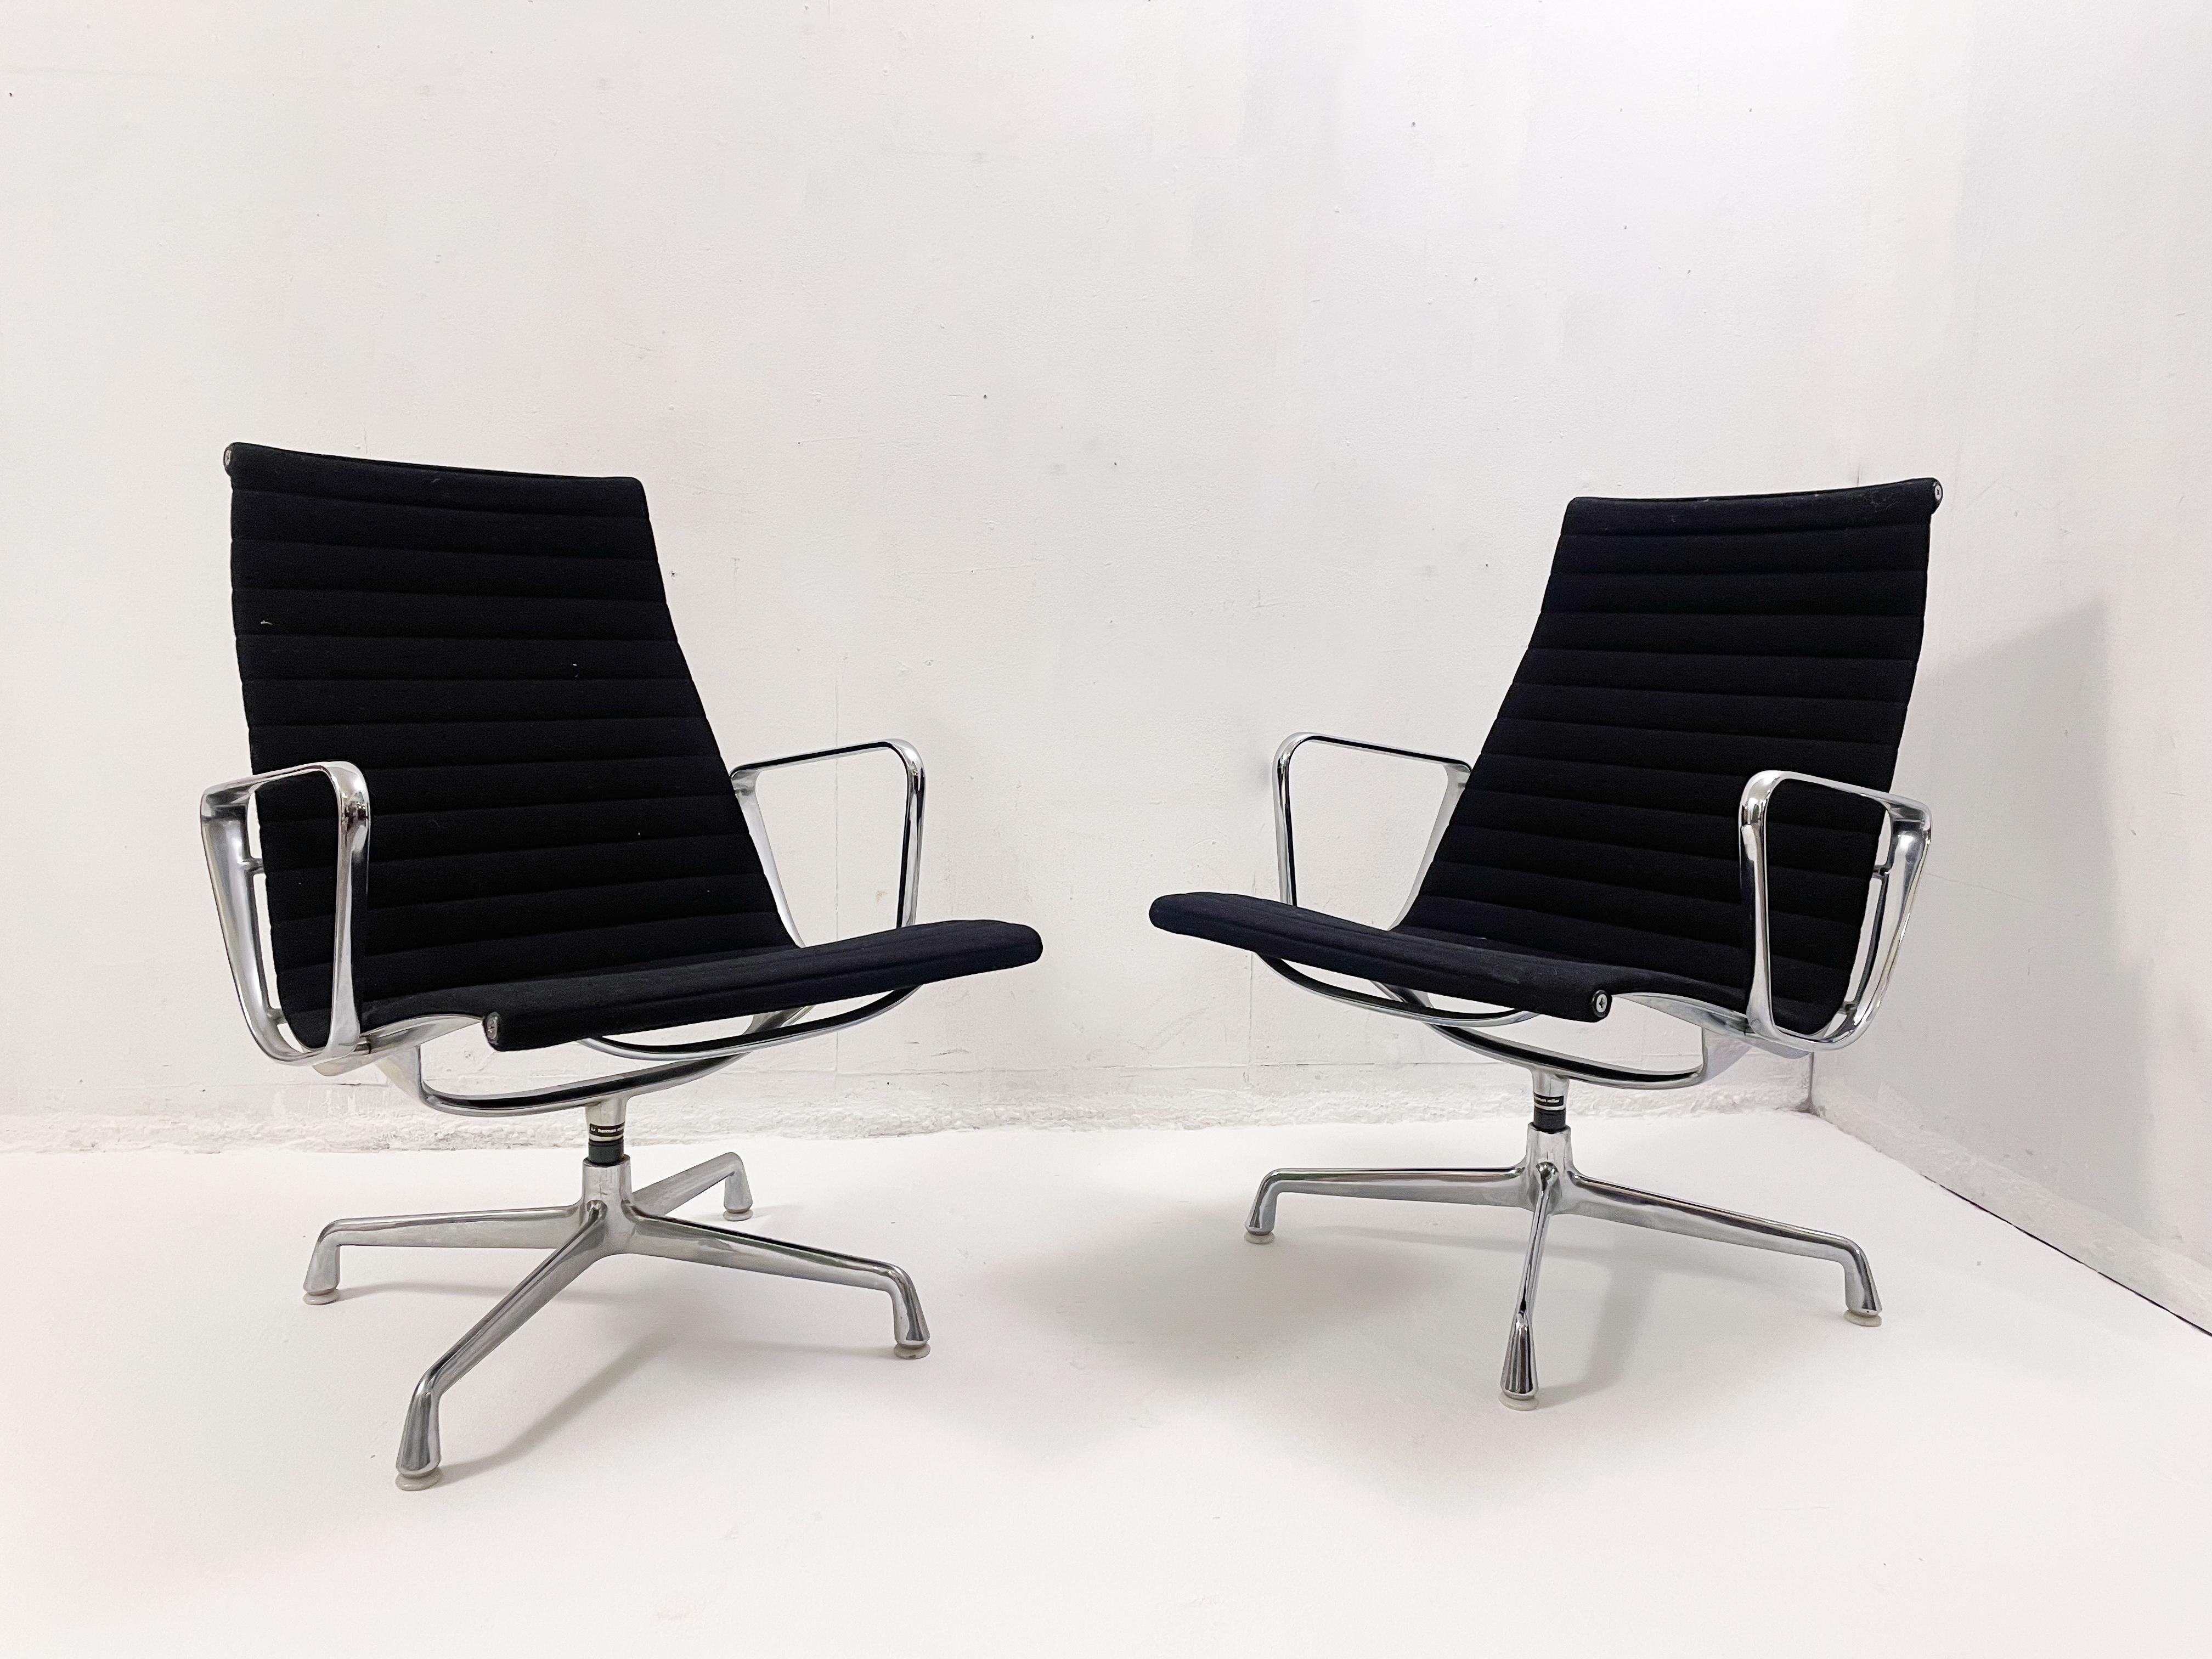 Eames Desk Chair EA 117 by Herman Miller, 1990s - 3 Available For Sale 1